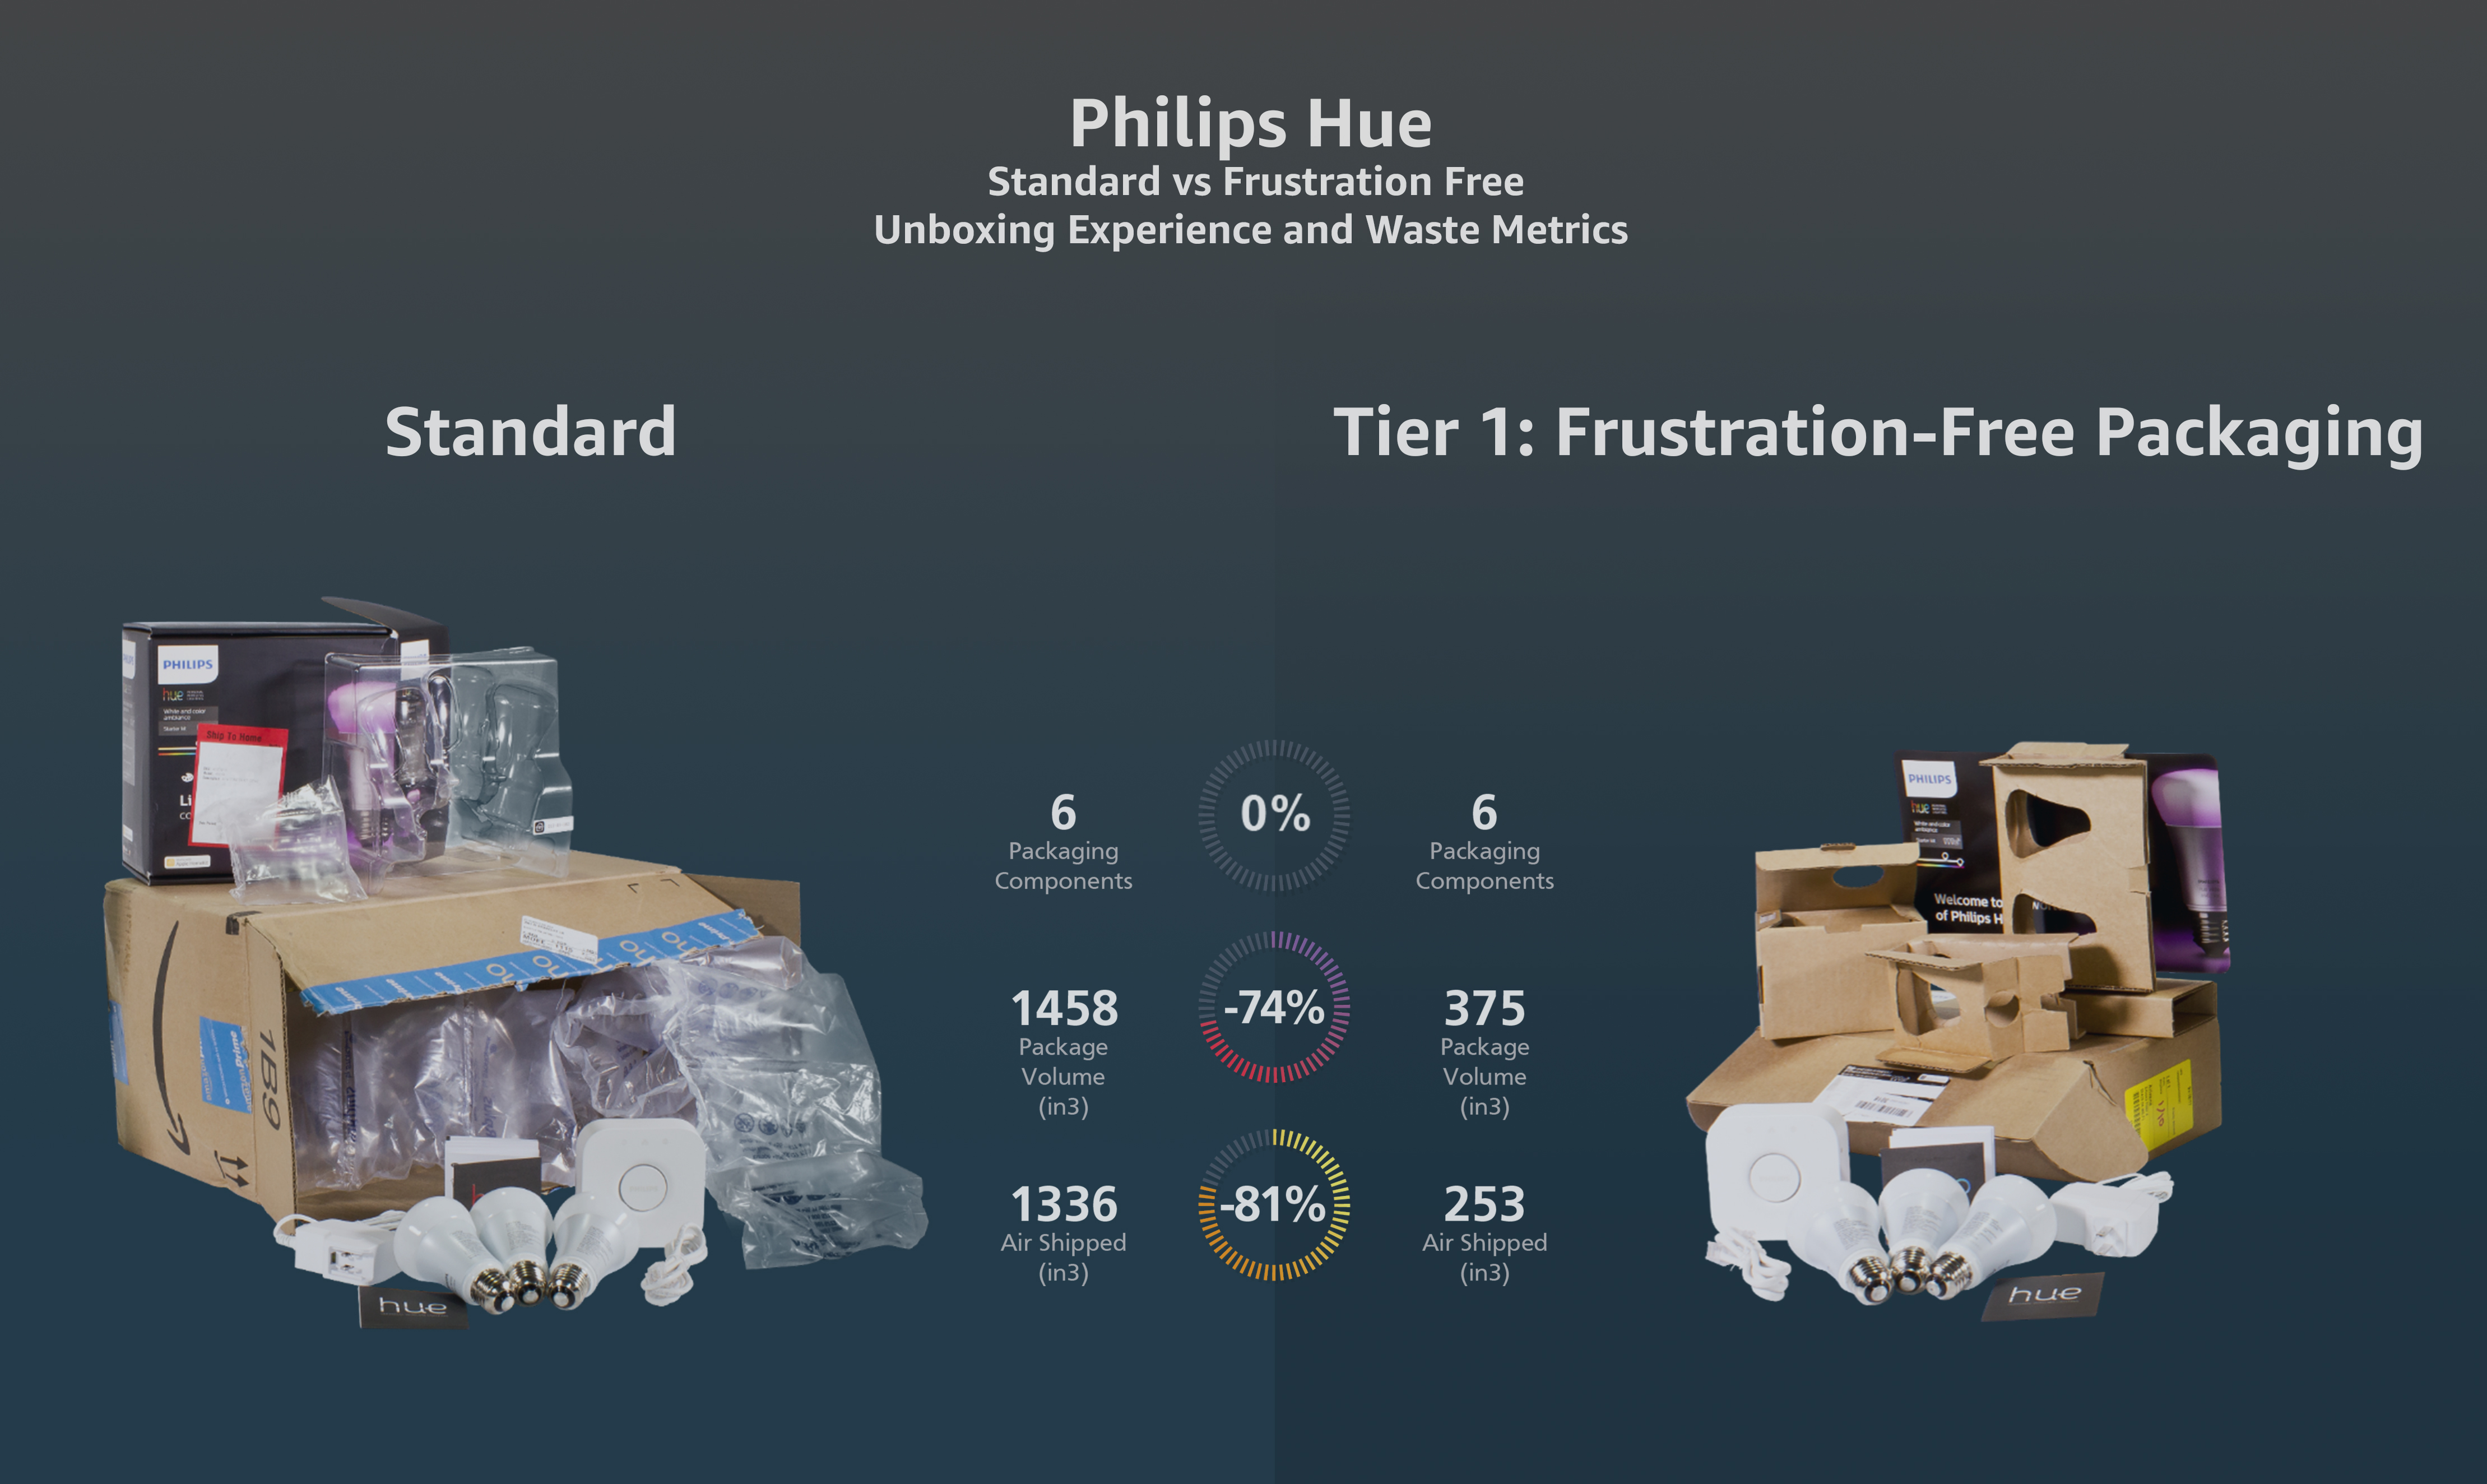 Philips Hue packaging case study from Amazon